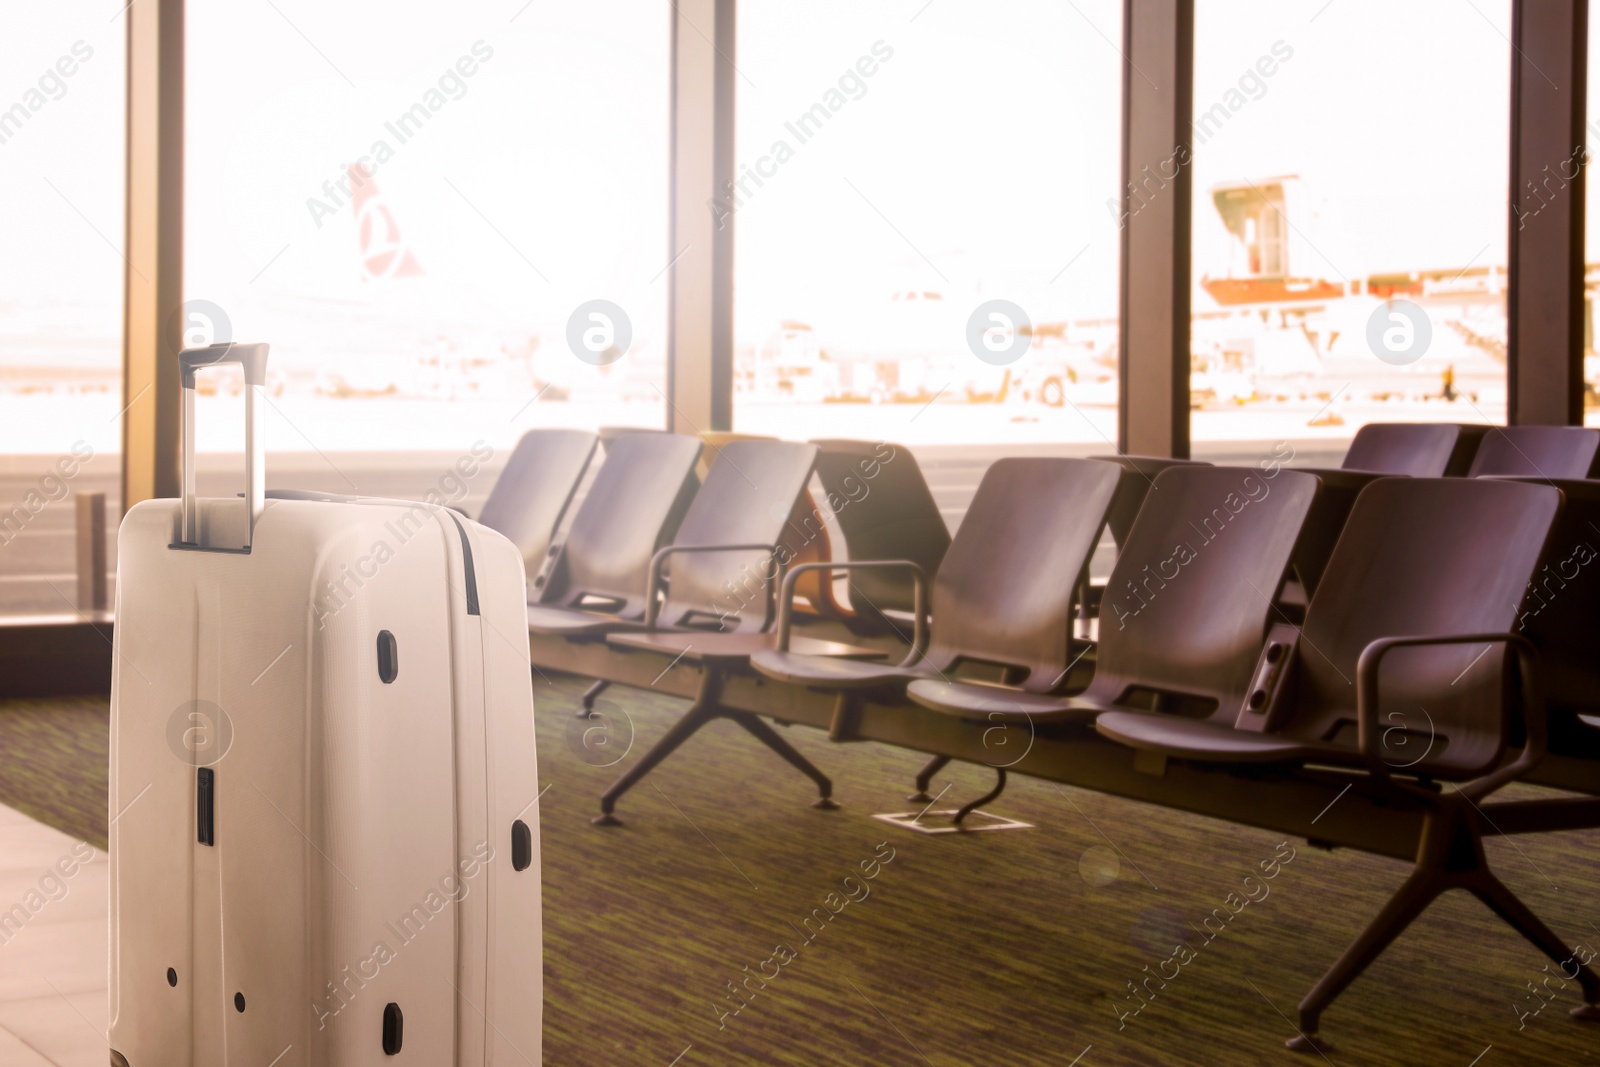 Image of Stylish white suitcase near waiting seats in airport terminal